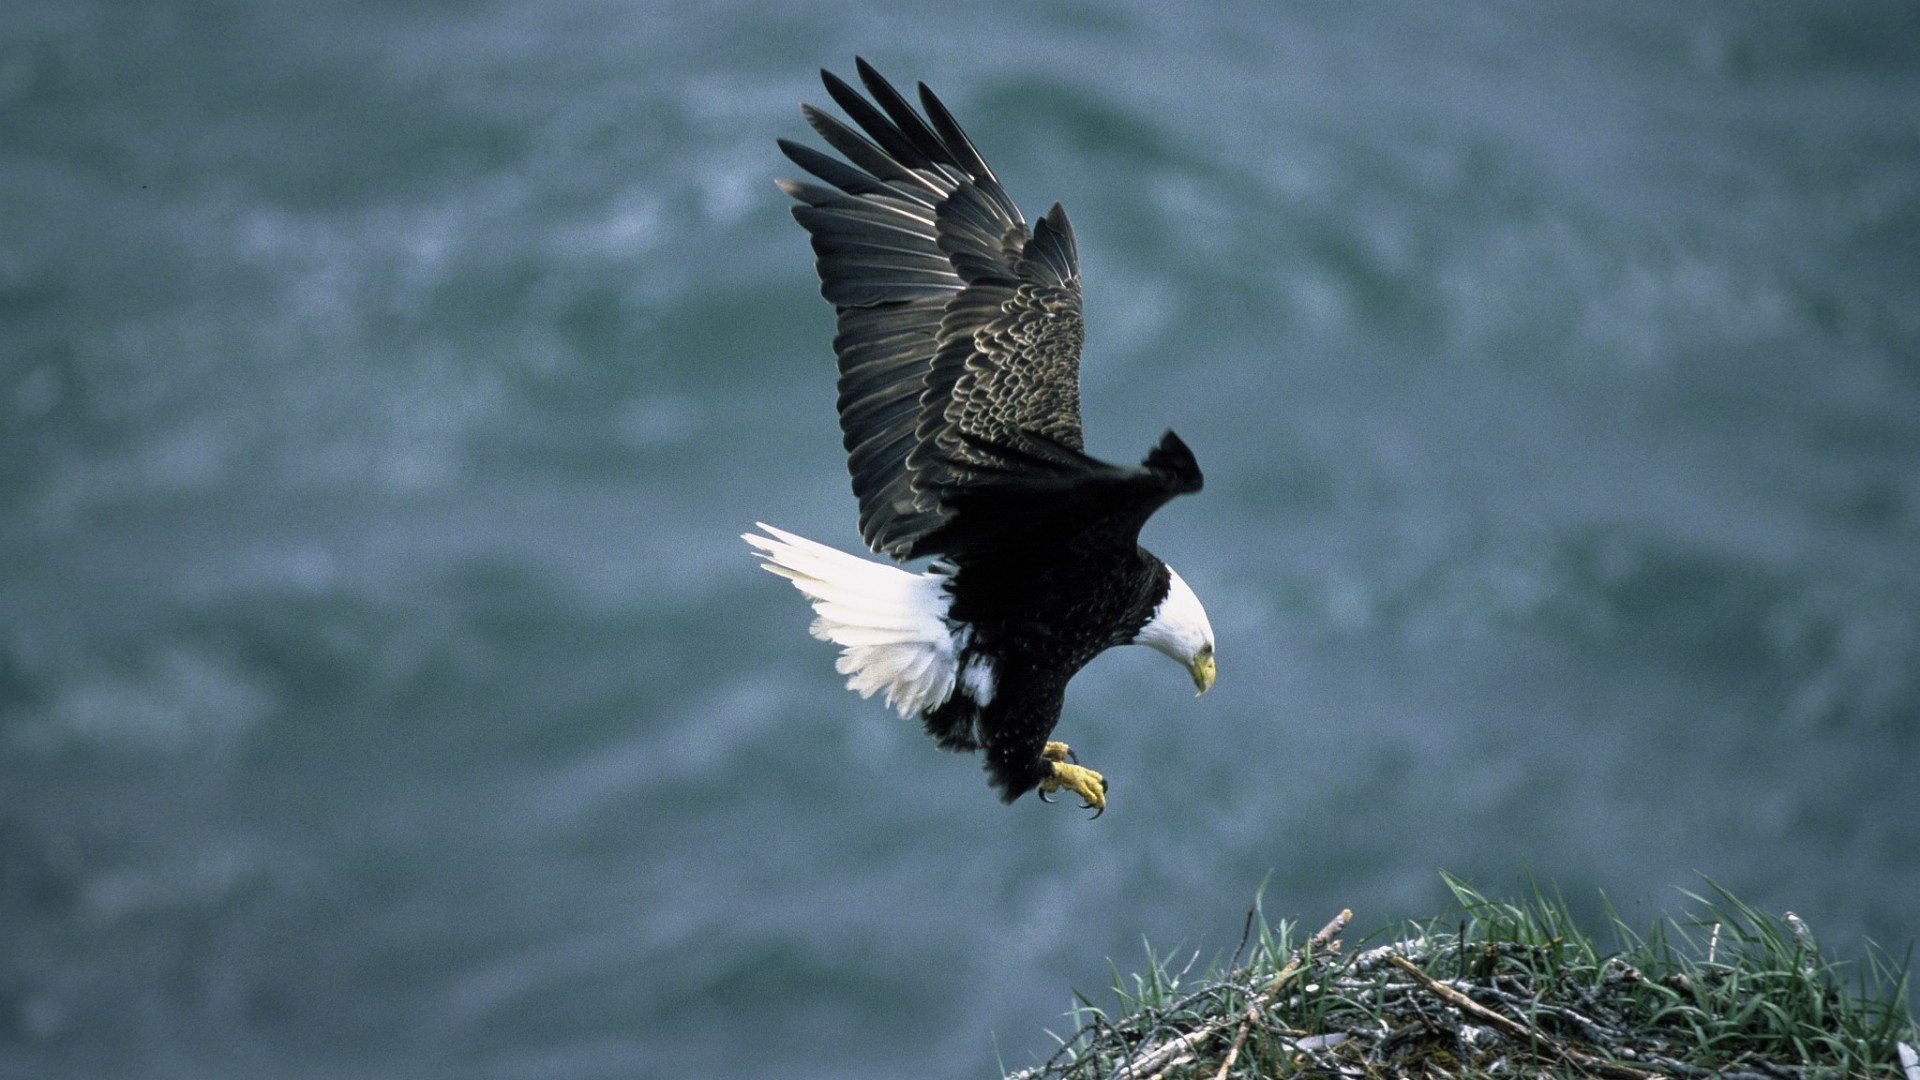 Bald Eagle, Striking backgrounds, Nature's might, Aerial prowess, 1920x1080 Full HD Desktop